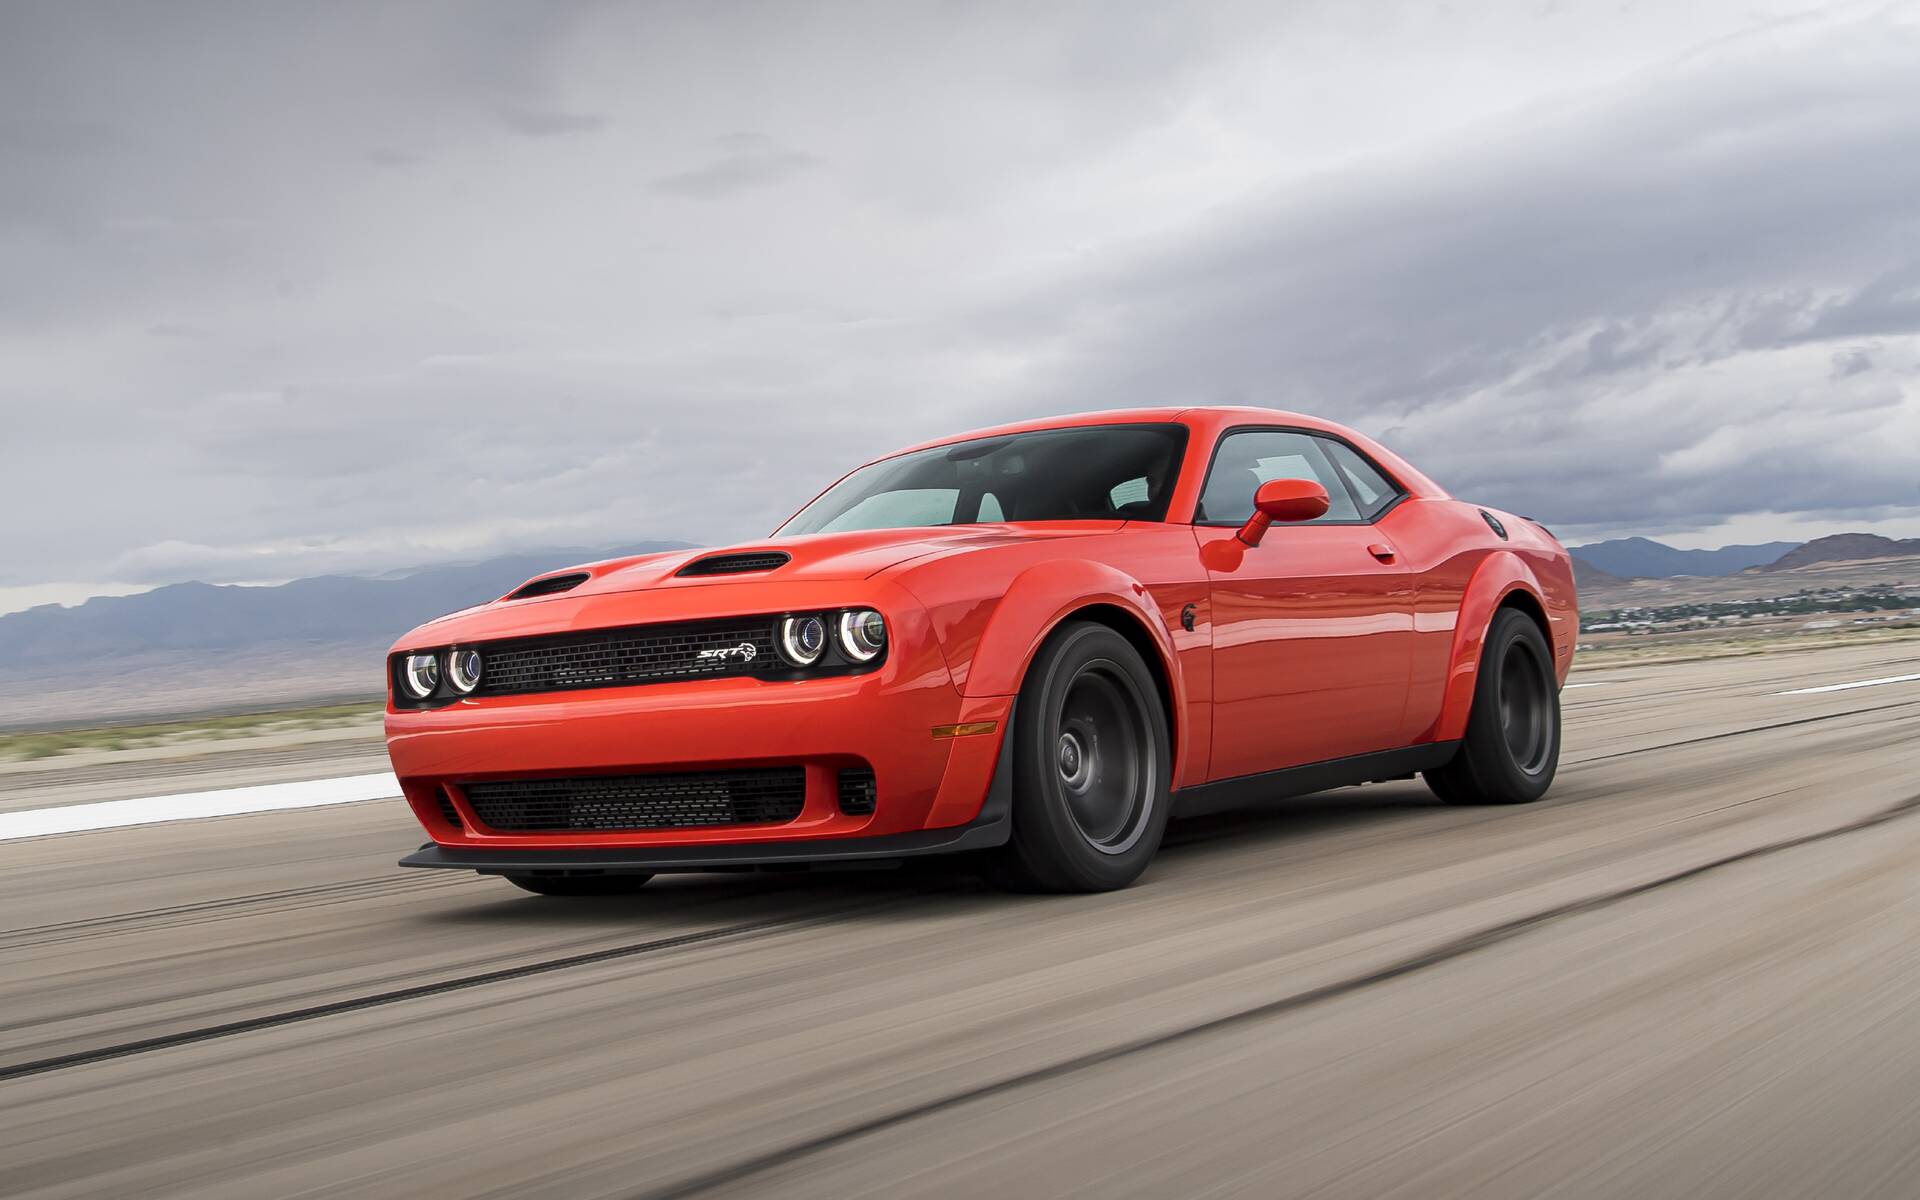 2021 Dodge Challenger SXT Price & Specifications - The Car Guide